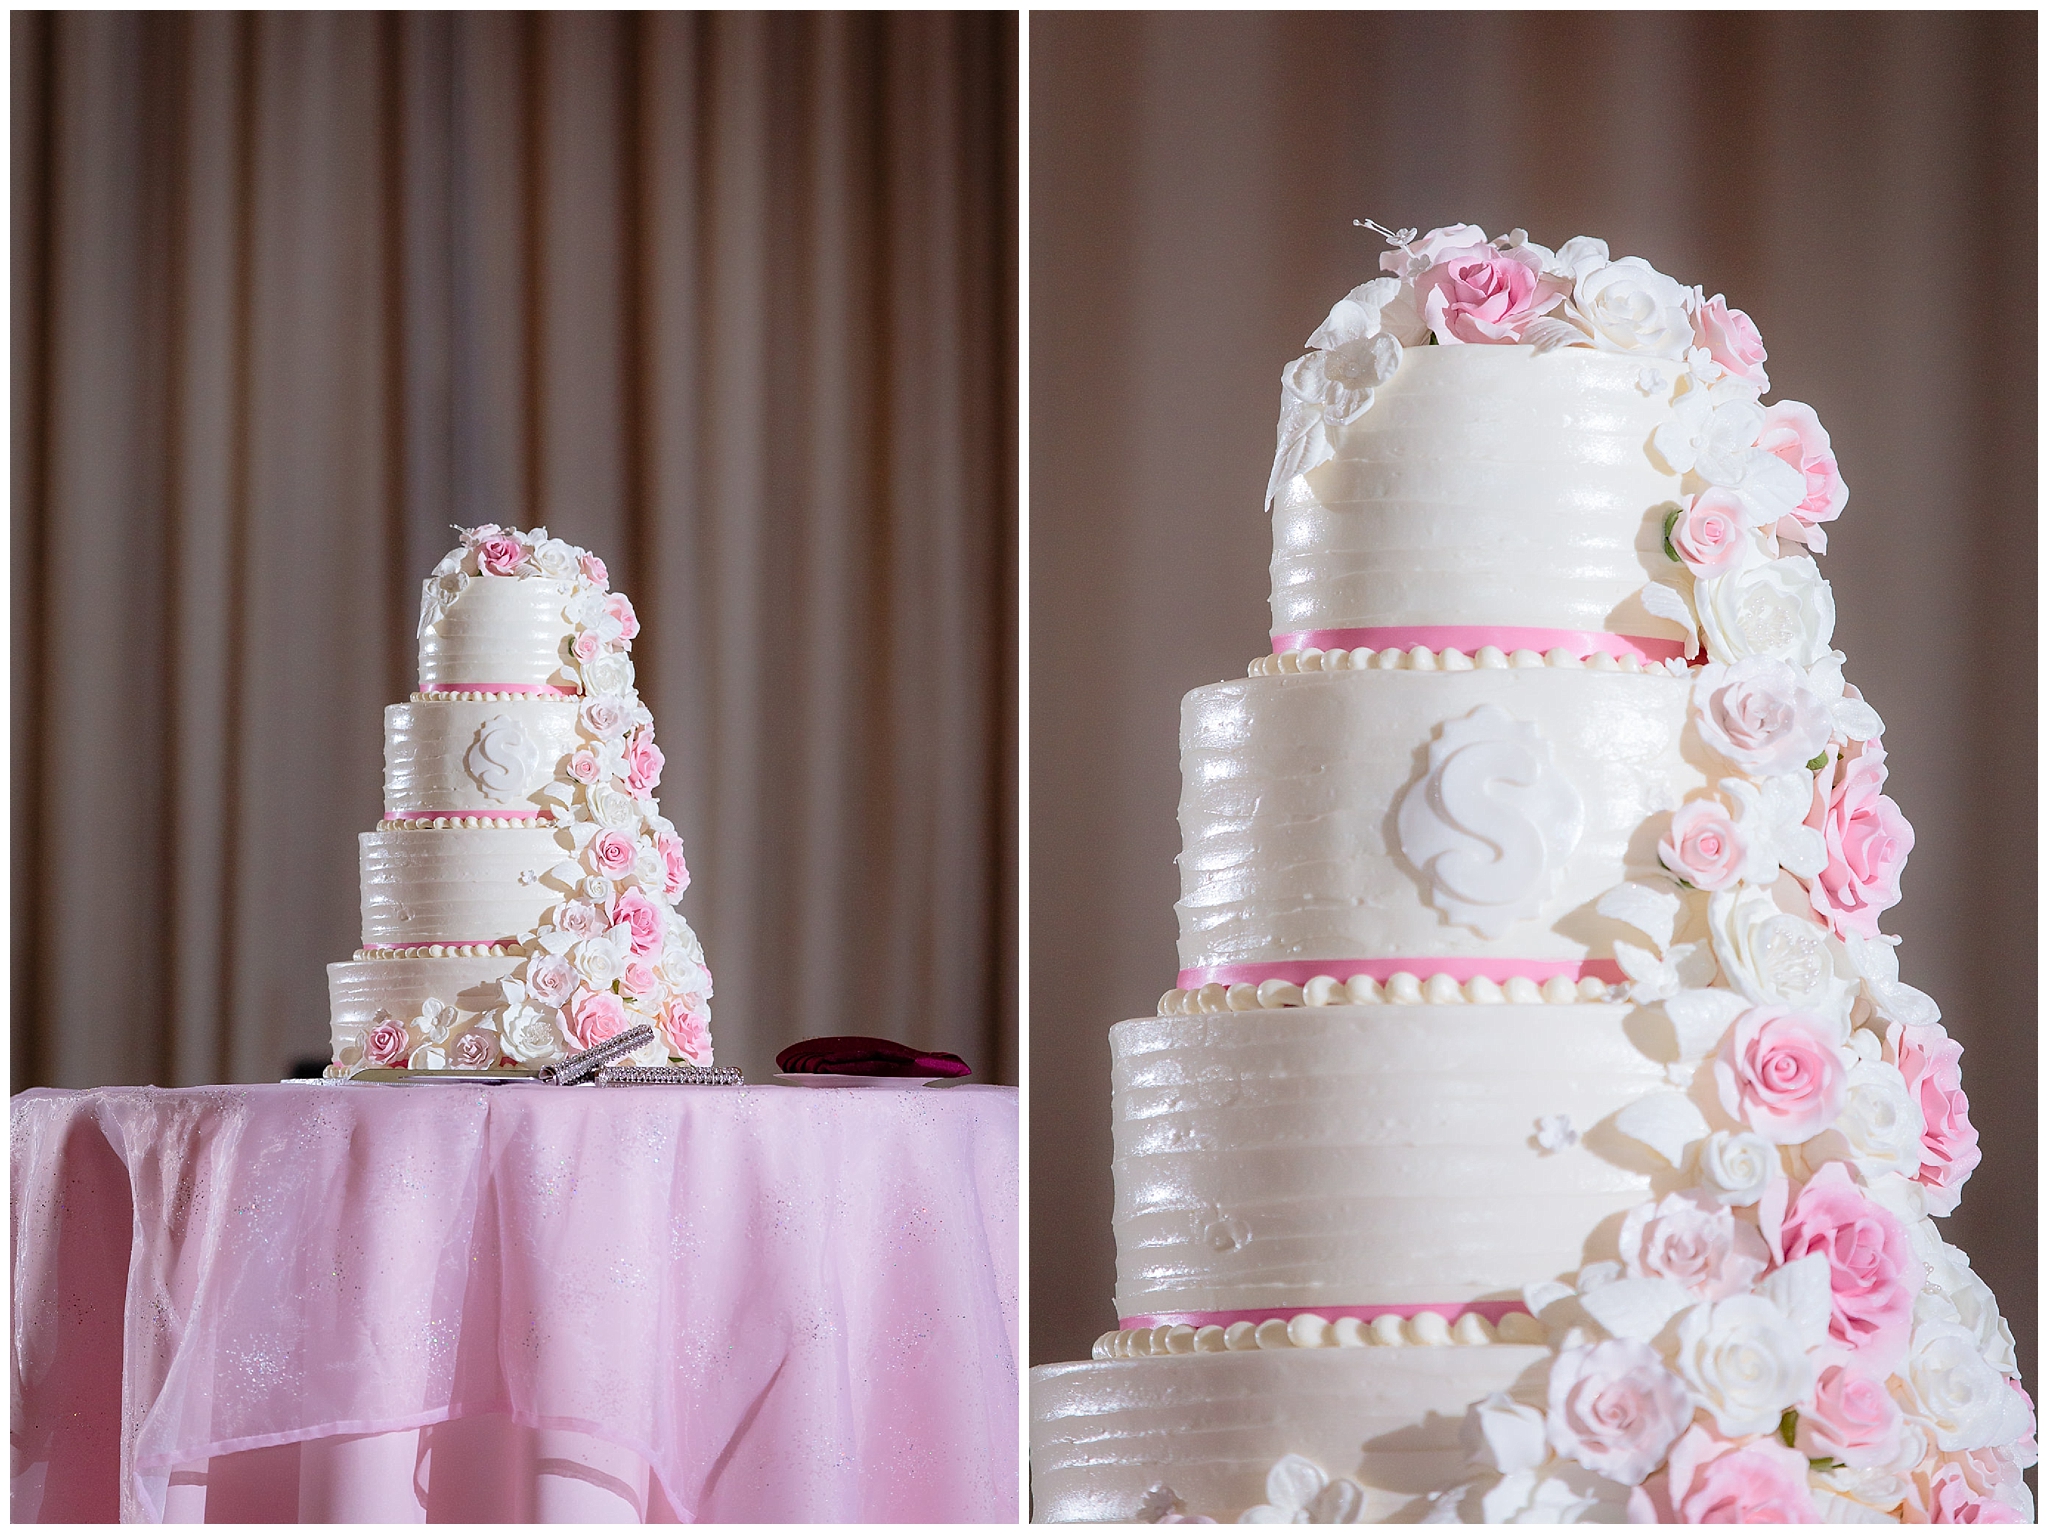 Wedding cake with pink and white flowers done by Rania's Catering at the Pennsylvanian